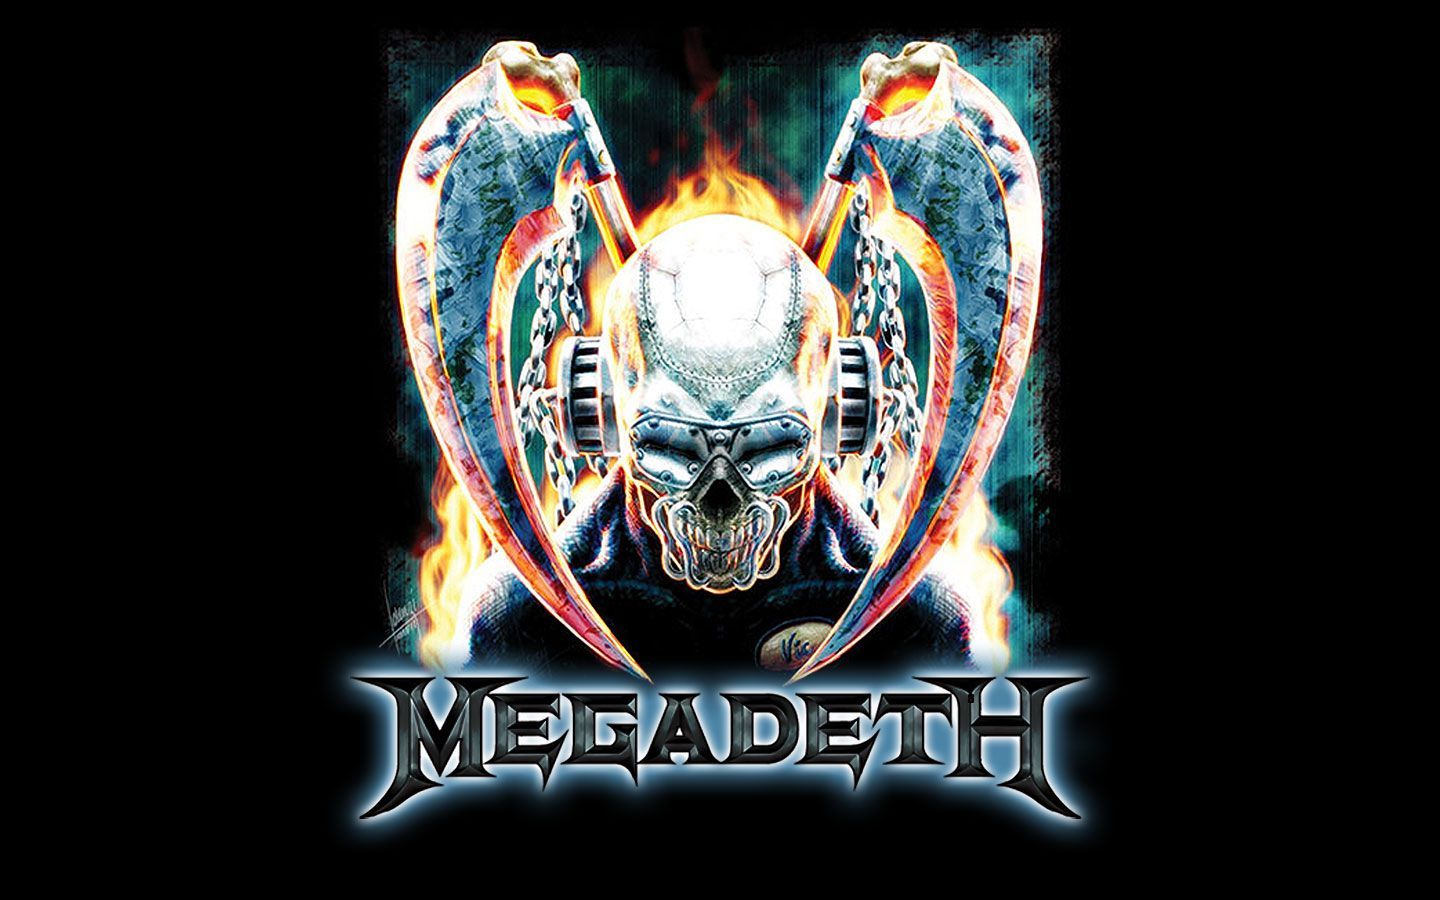 Heavy metal megadeth wallpaper - - High Quality and other